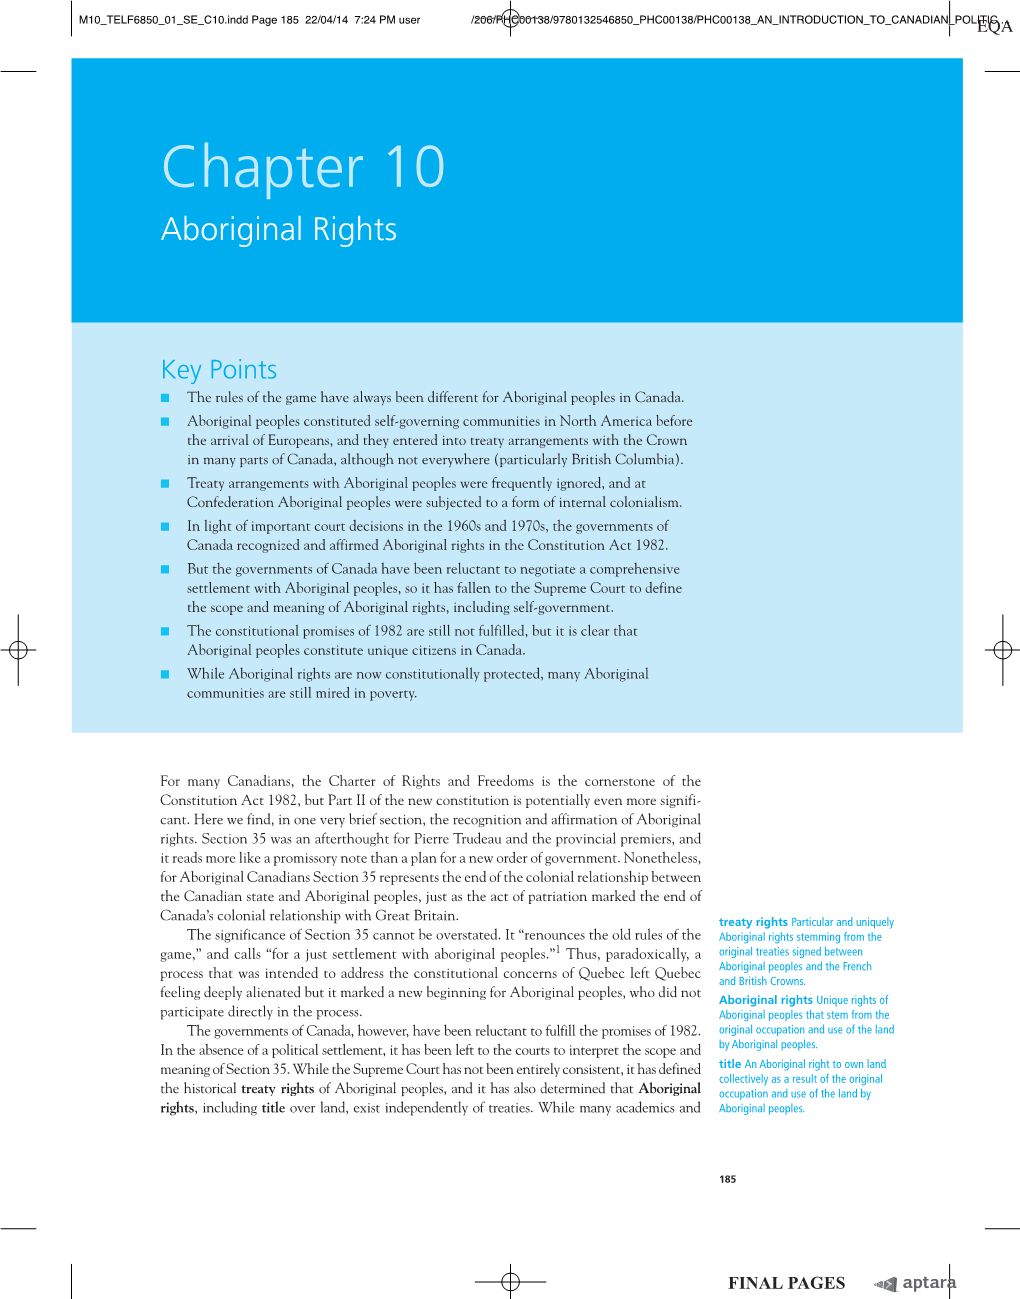 Chapter 10 Aboriginal Rights